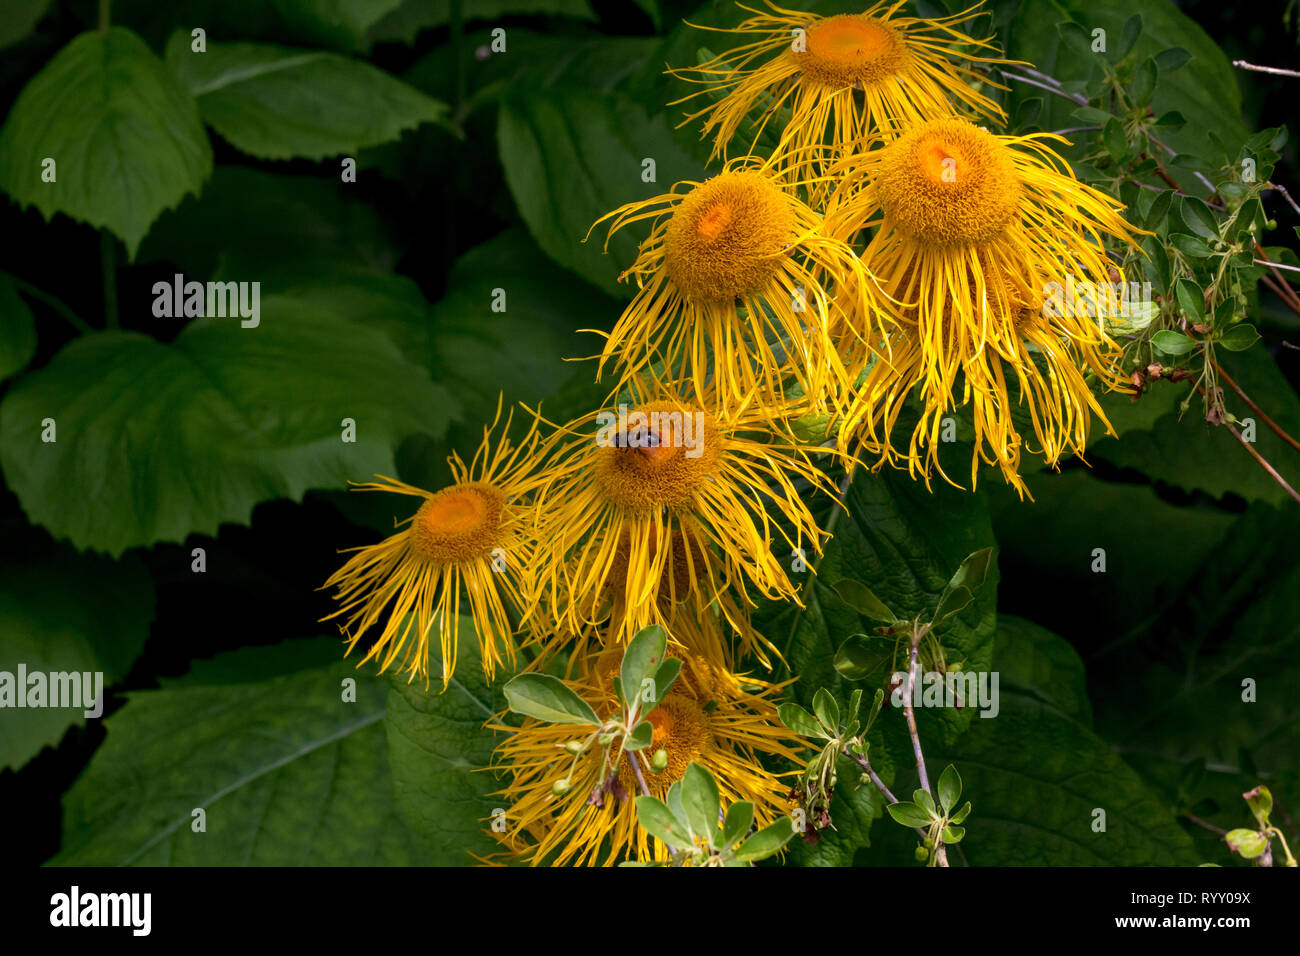 Unusual yellow and orange flowers with large heads and droopy petals stand in contrast to dark green behind.  Insect working hard gathering pollen Stock Photo